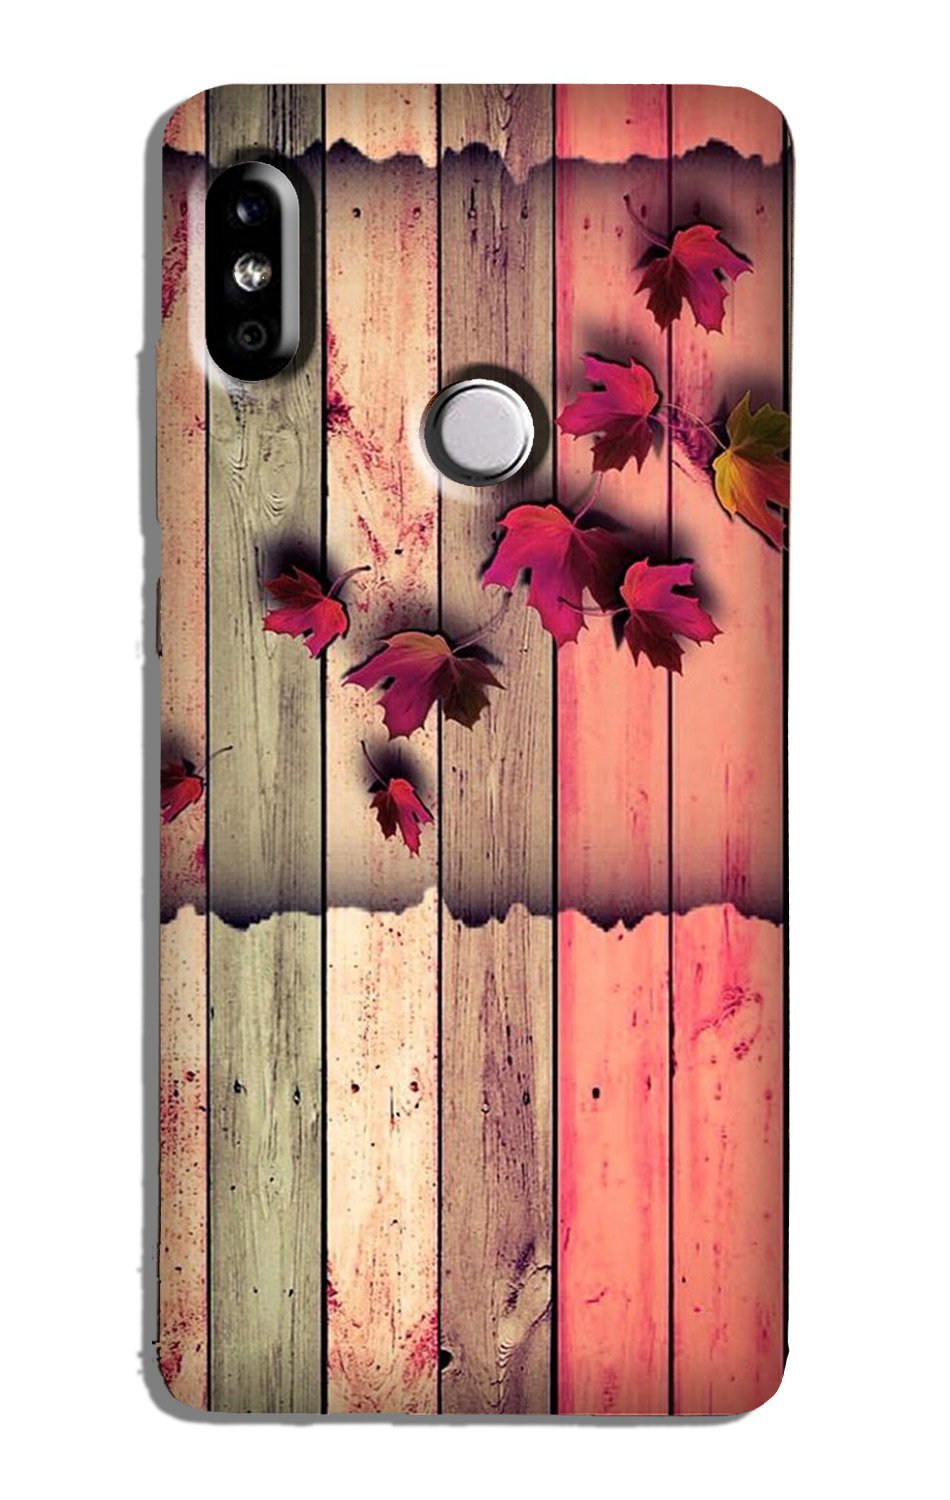 Wooden look2 Case for Xiaomi Redmi Note 7/Note 7 Pro